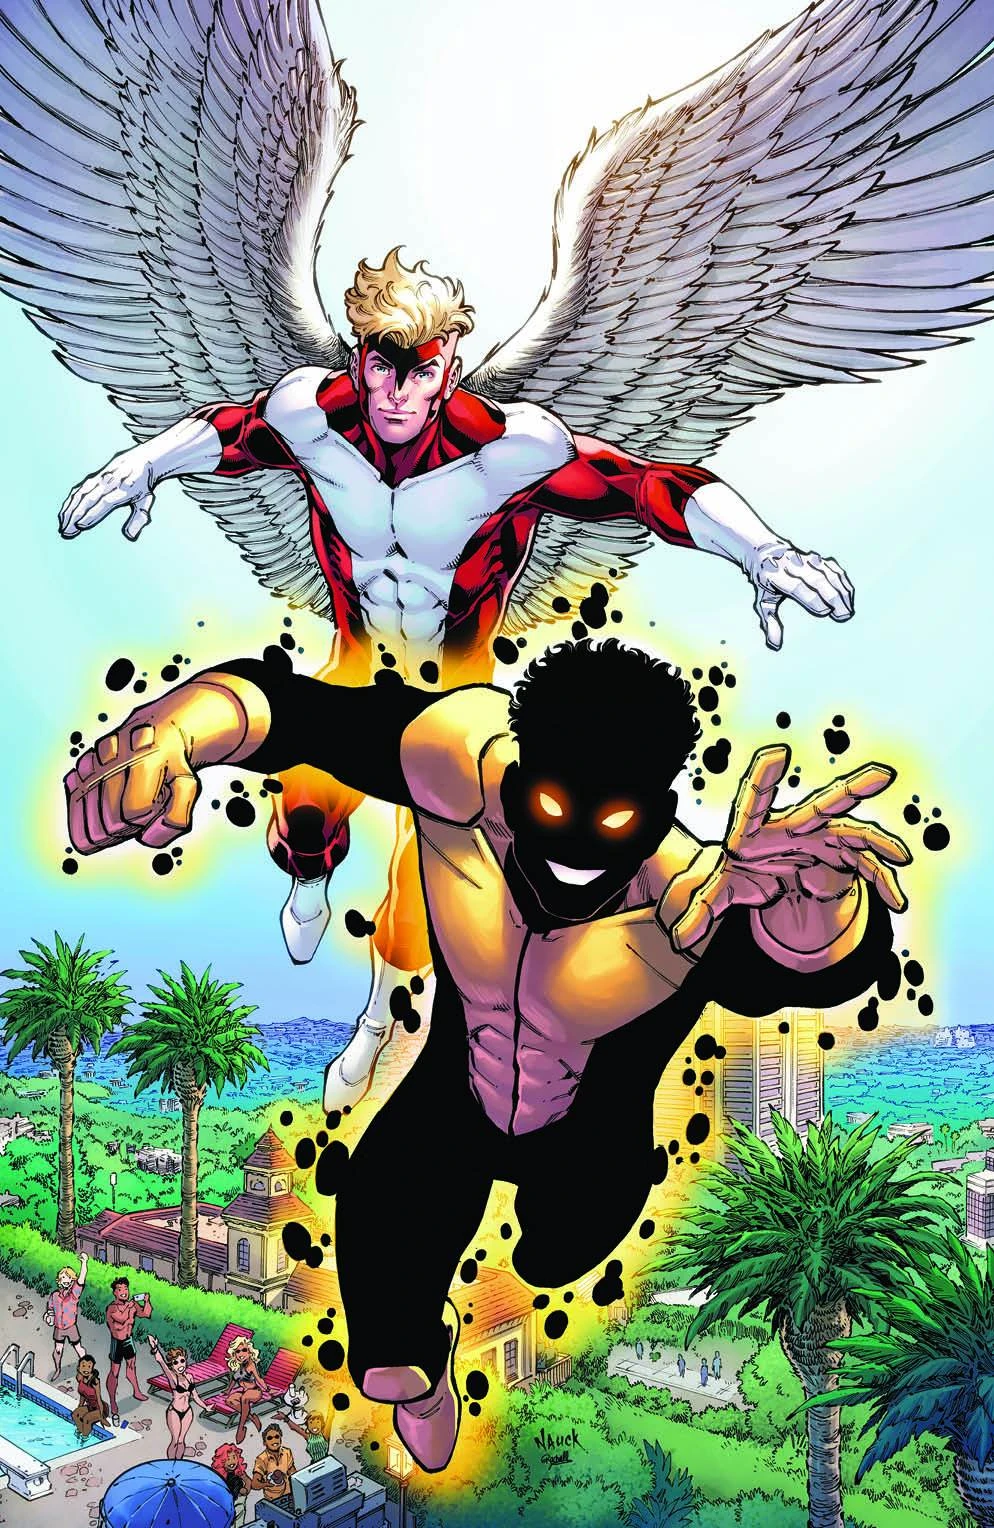 Angel and Sunspot take to the sky on Todd Nacuk's Sunset Comix variant cover to X-Corp Vol. 1 #1 "Simply Superior" (2021), Marvel Comics